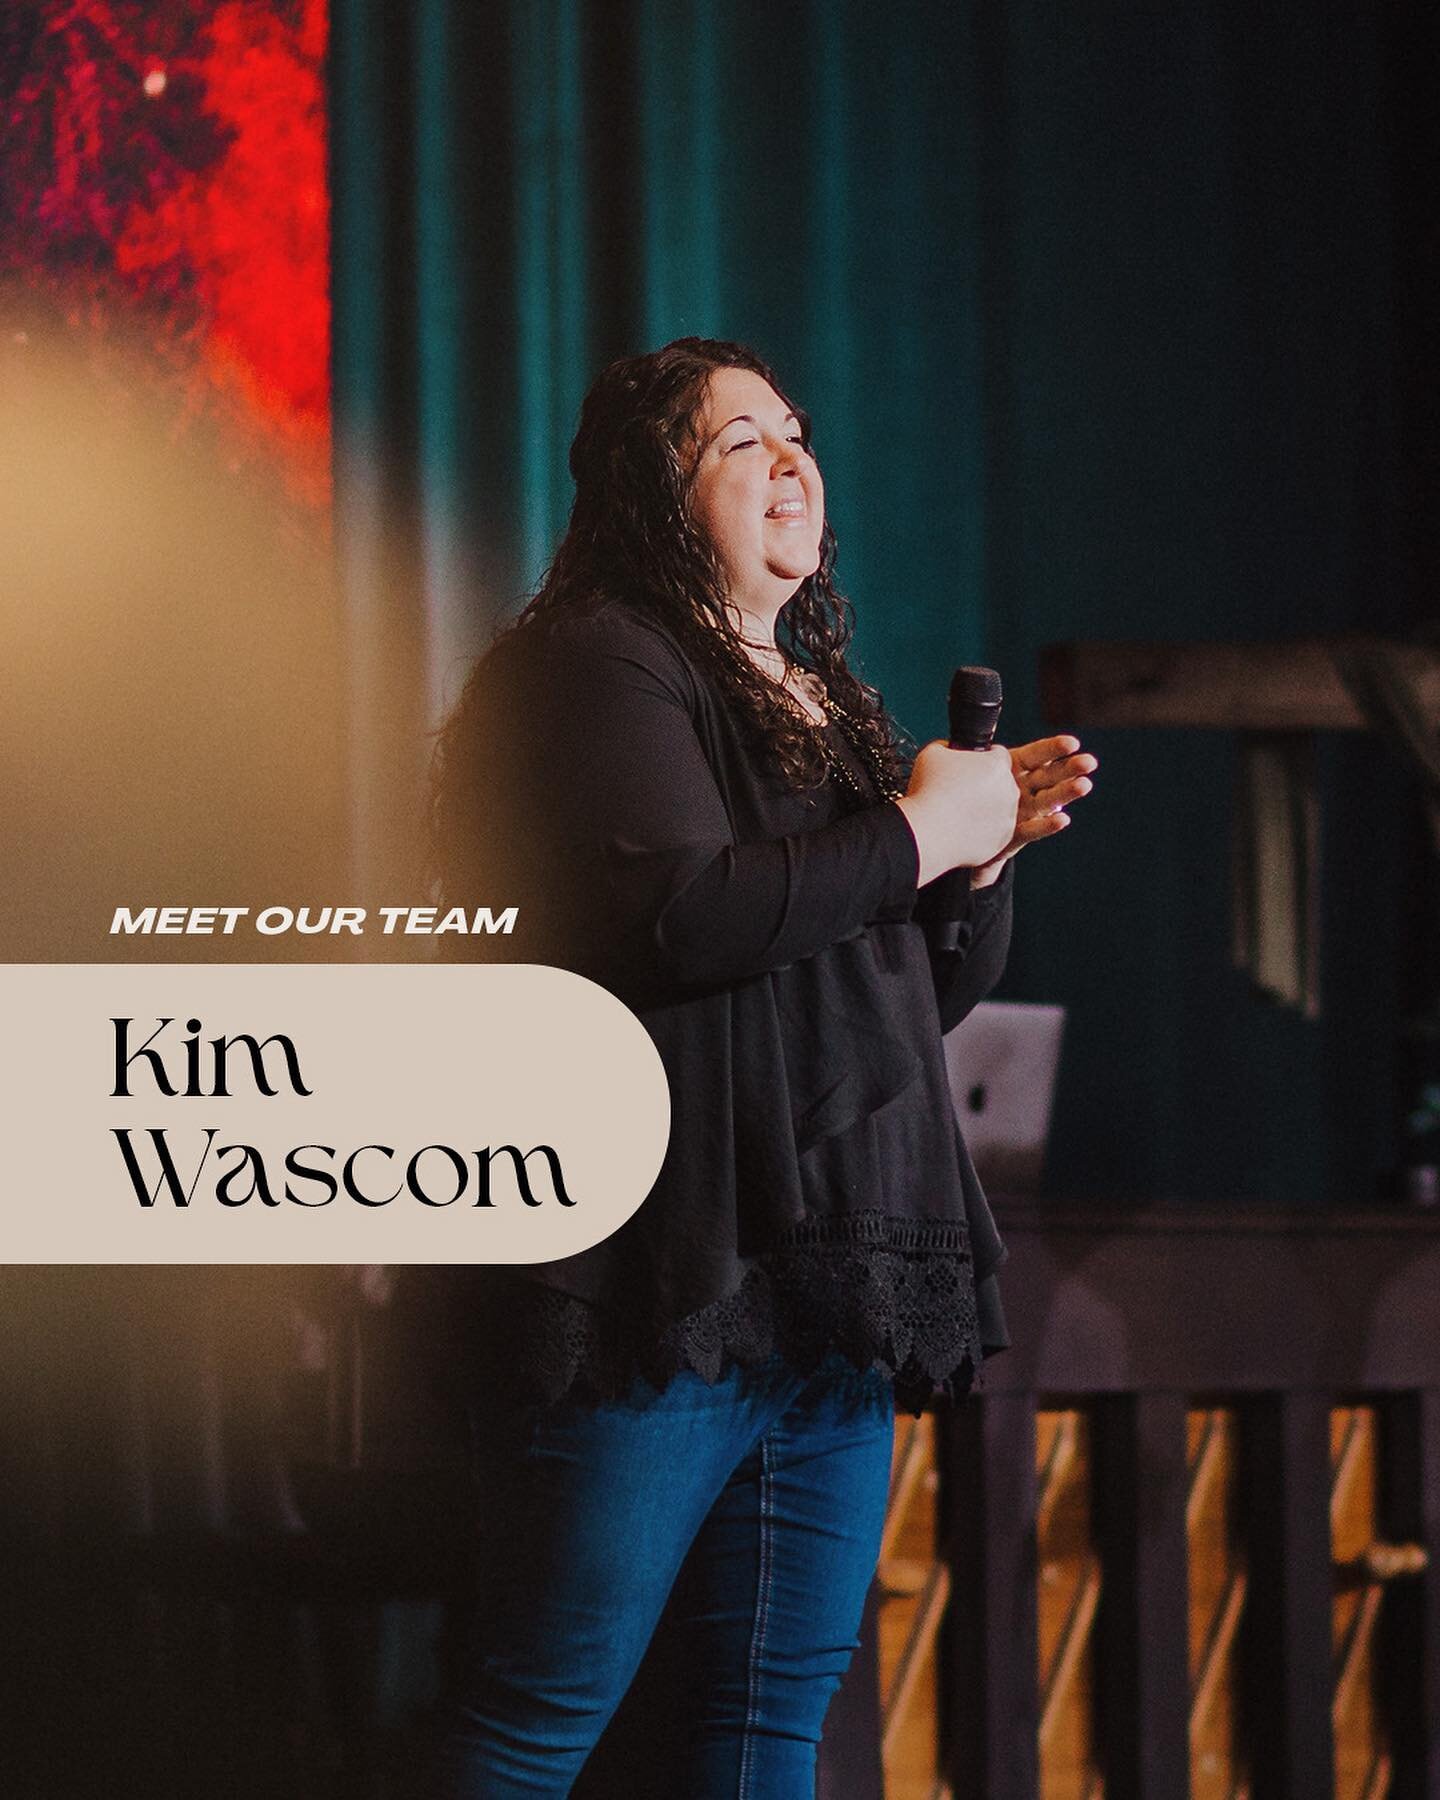 Meet Kim! 👋 Kim Wascom has been part of Conduit Church since Spring 2012. She&rsquo;s beyond grateful to serve alongside a team that loves Jesus and desires to authentically and simply worship Him in Spirit and Truth. 
It is a pure joy to have her i